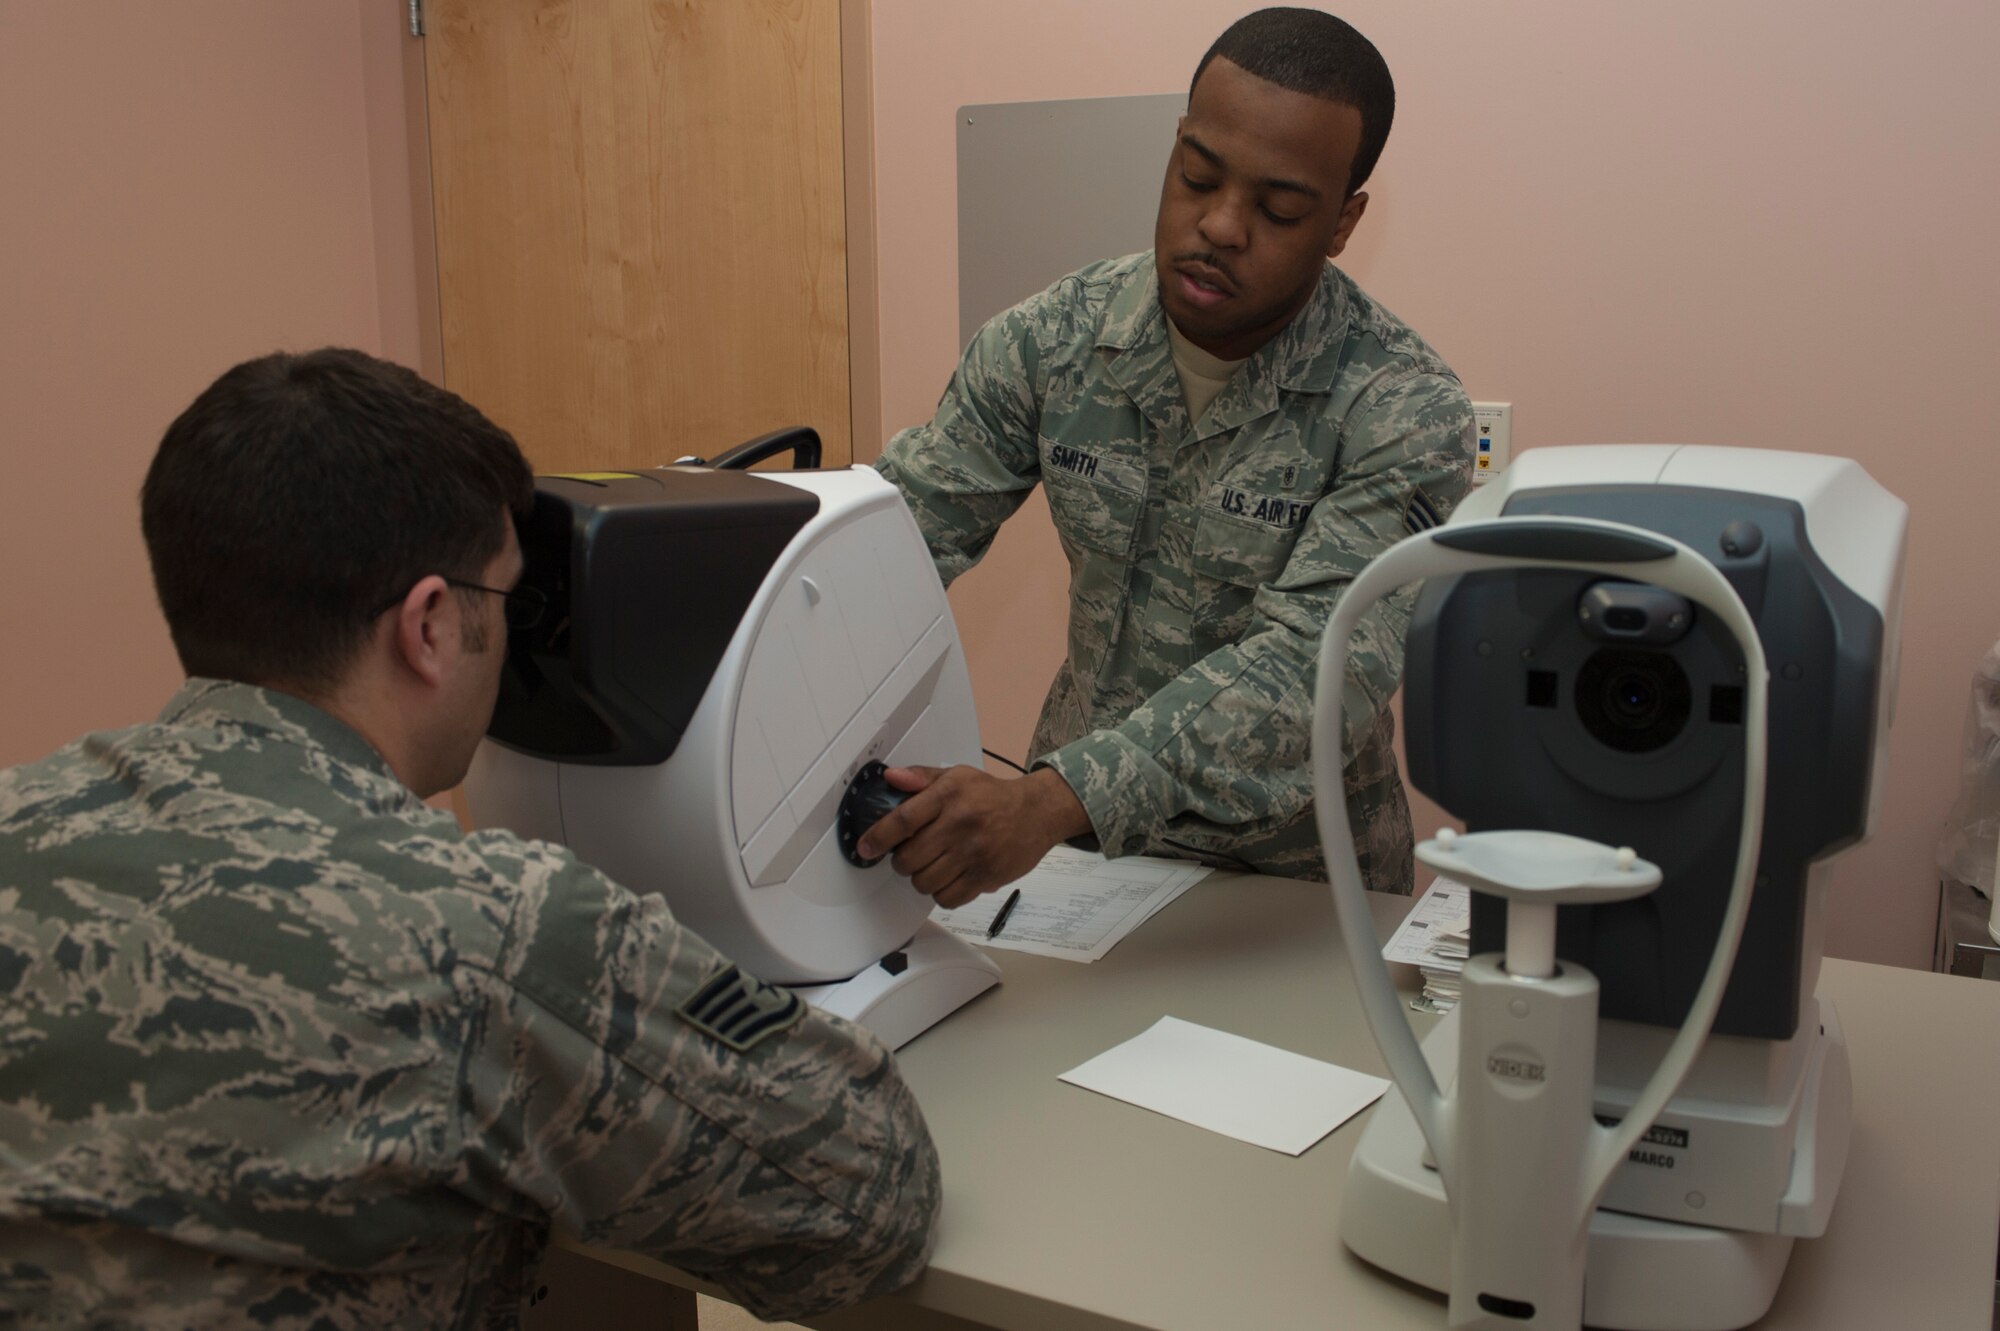 U.S. Air Force Senior Airman JaMicheal Smith, 99th Aerospace Medicine Squadron aerospace technician, conducts an eye exam on a patient Jan. 10, 2014, at Nellis Air Force Base, Nev. Regular eye exams are conducted to ensure work related sight problems can be quickly found and treated. (U.S. Air Force photo/Airman 1st Class Timothy Young)